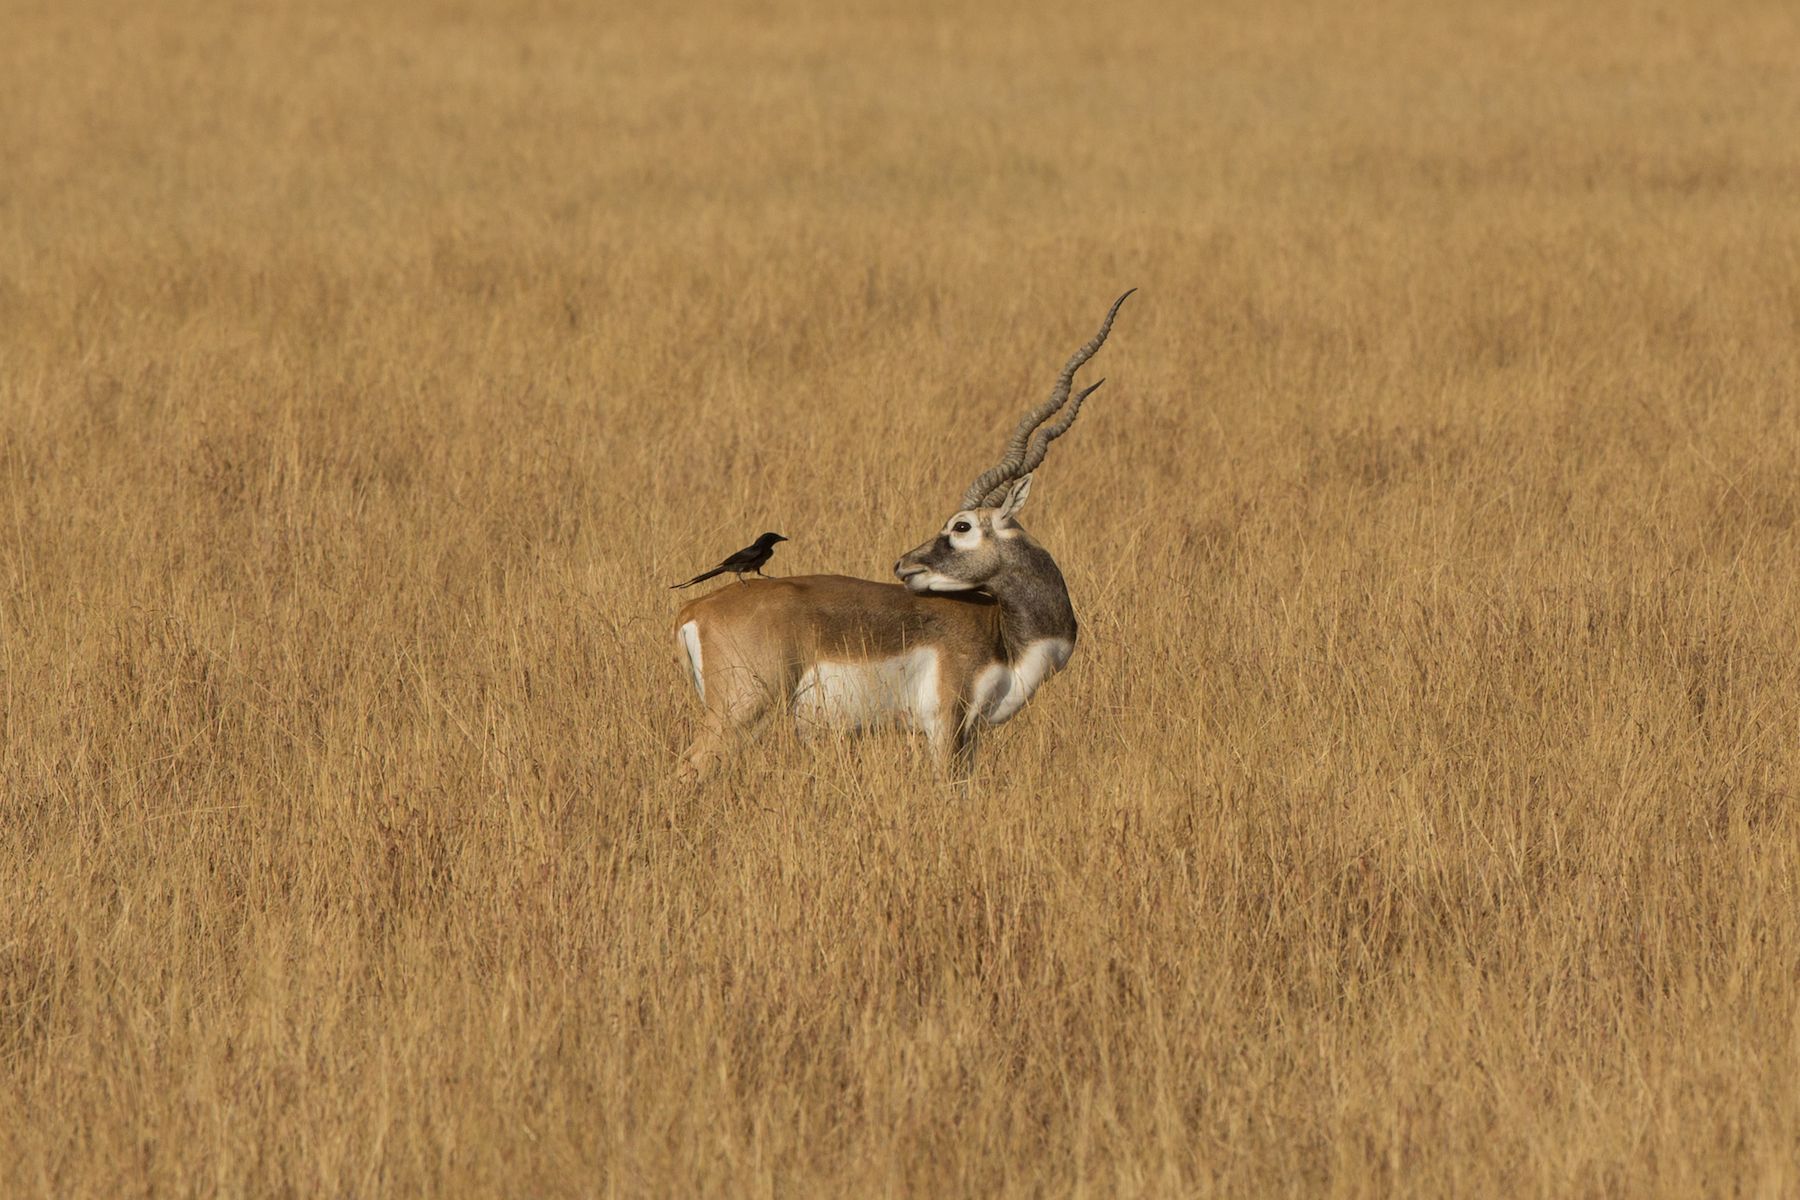 A young Blackbuck peers at a Black Drongo that has landed on its back, Velavadar, Gujarat